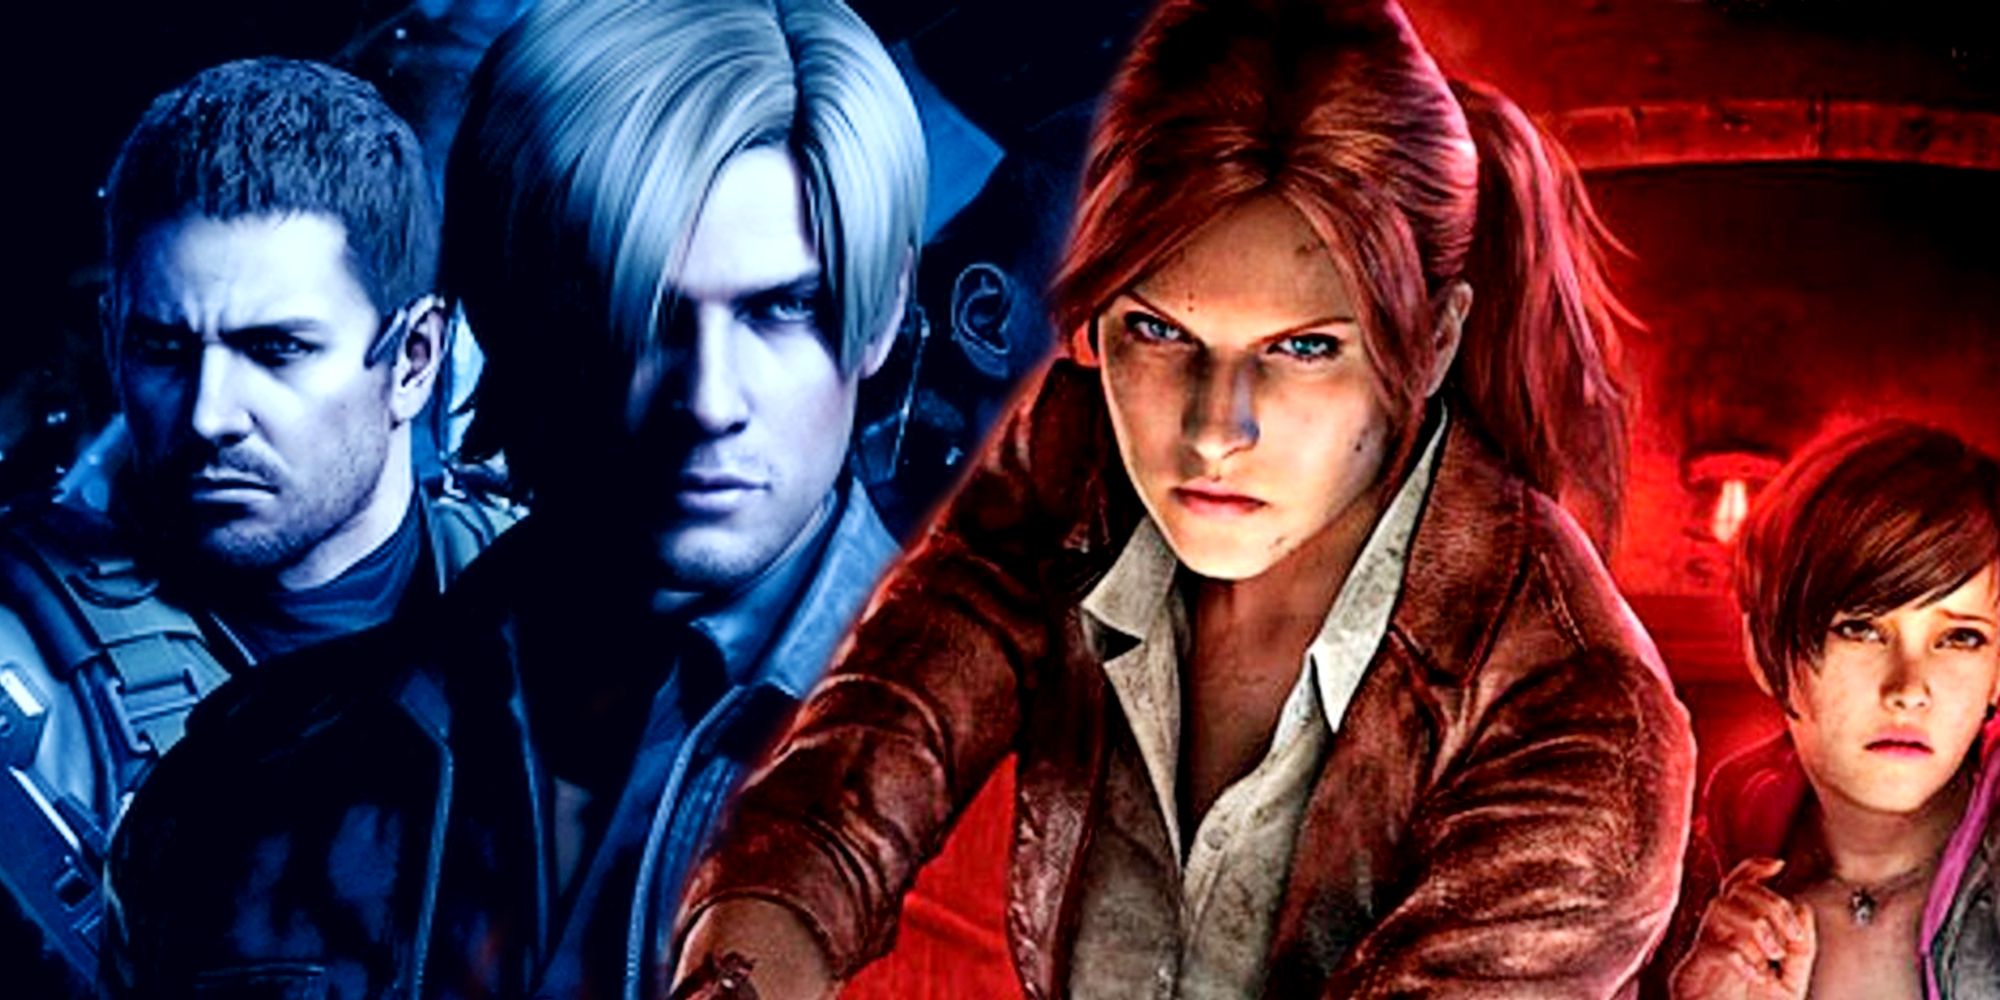 Leon Kennedy and Claire Redfield in Resident Evil 6 and Revelations 2